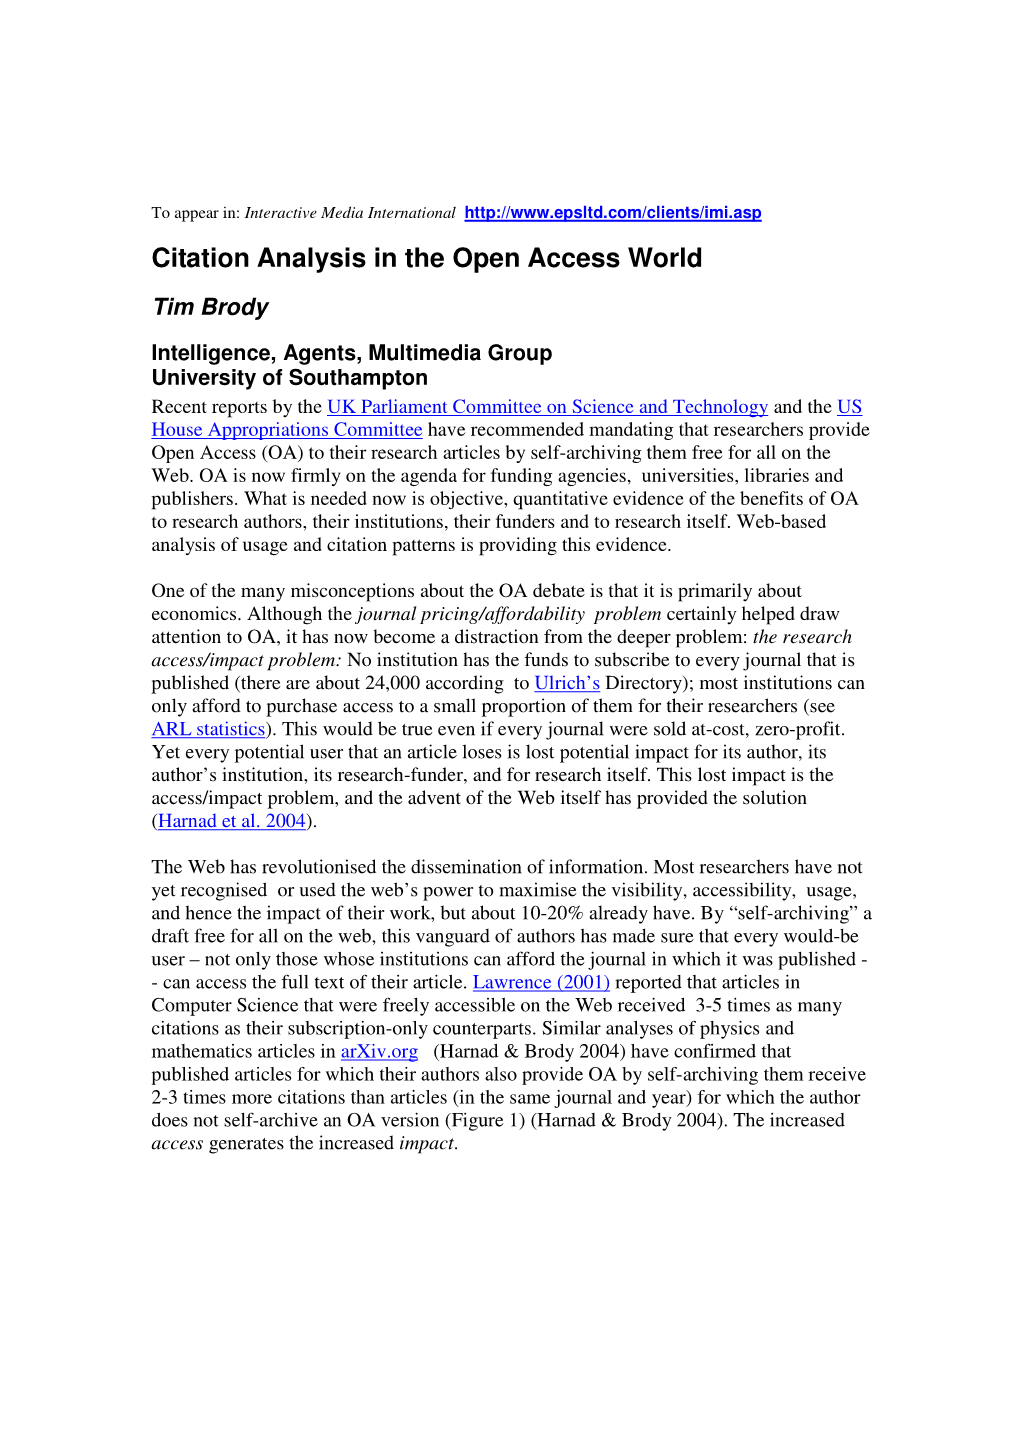 Citation Analysis in the Open Access World